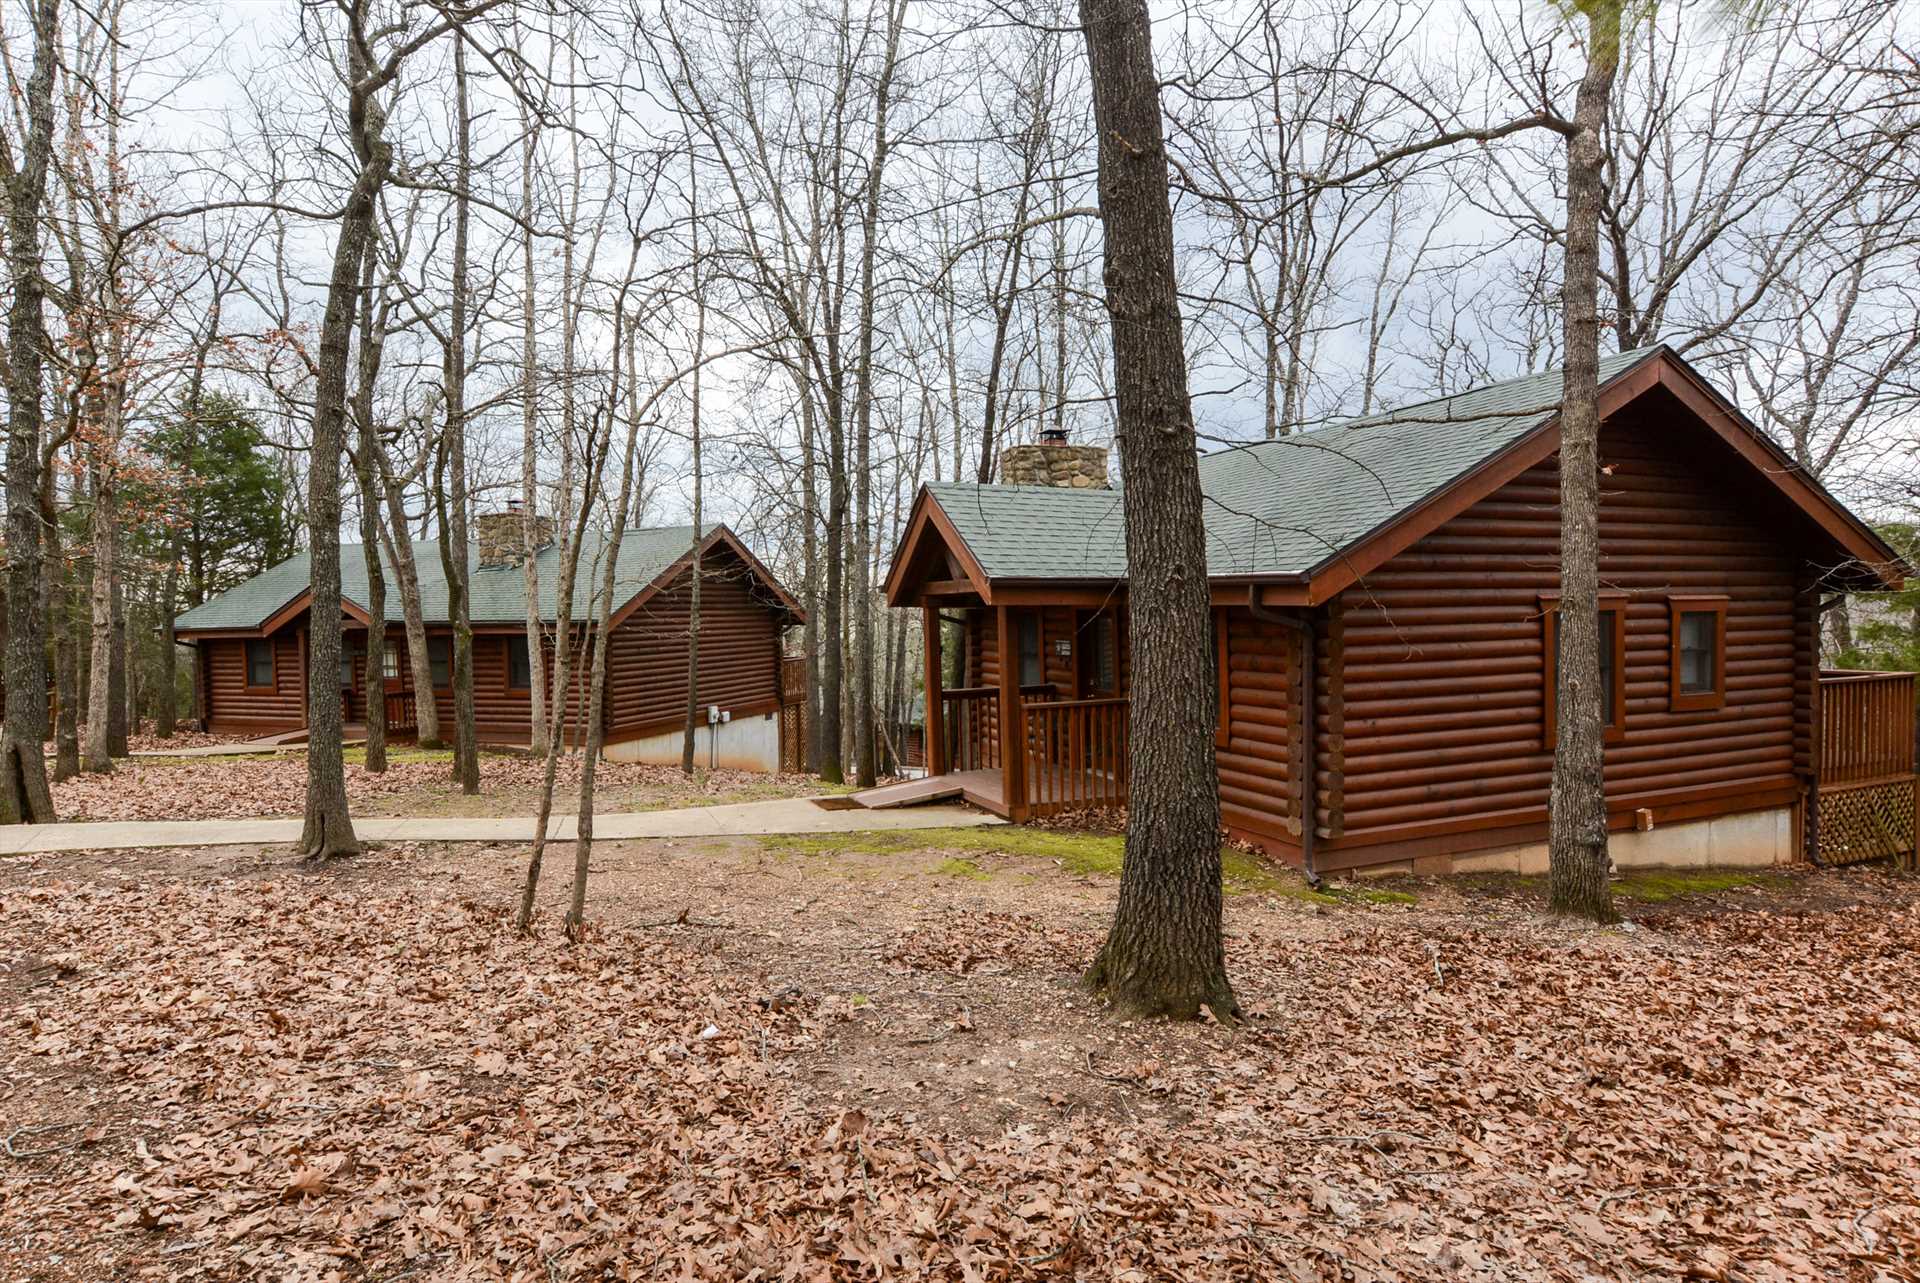 This property is located in the heart of the Ozarks.